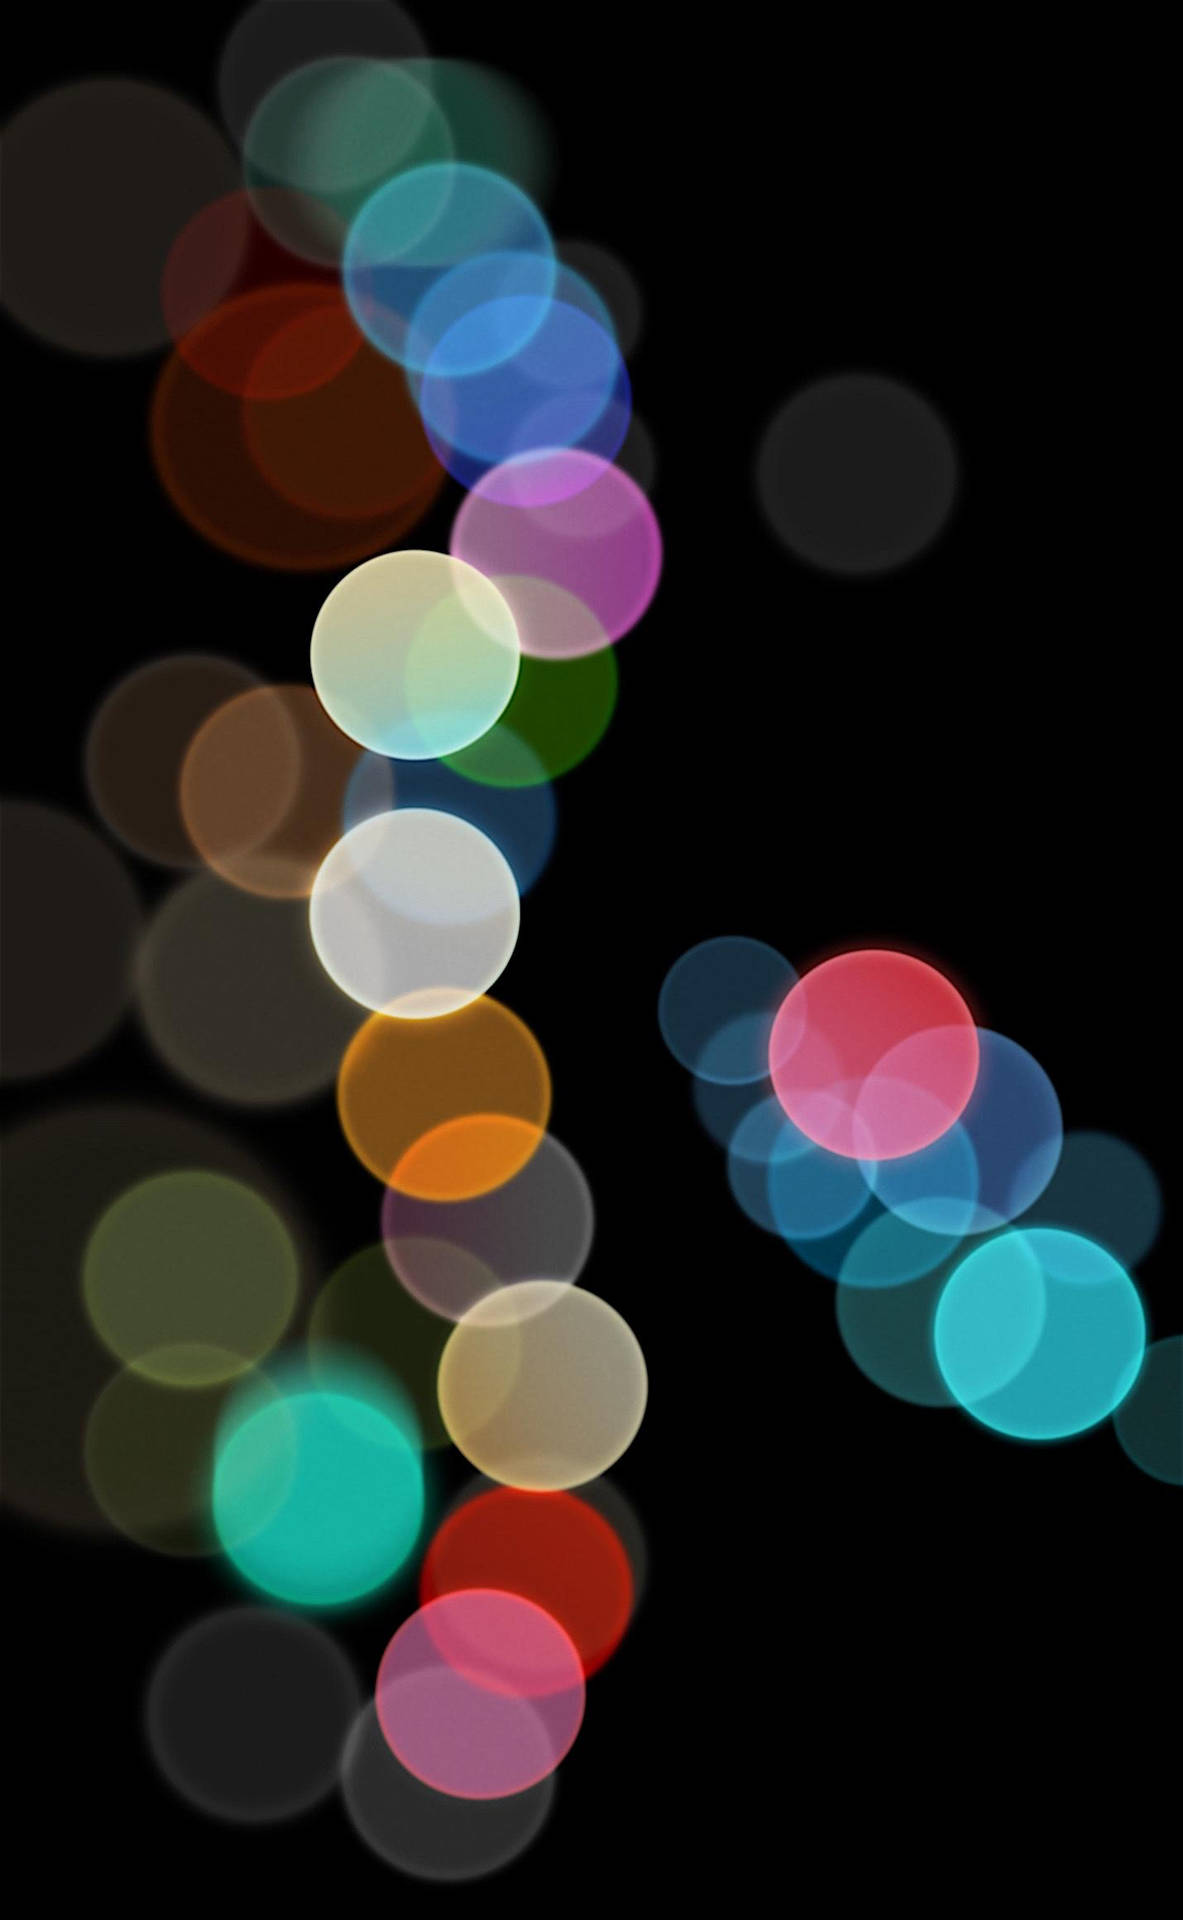 Abstract Bokeh Lights Original Iphone 7 Background